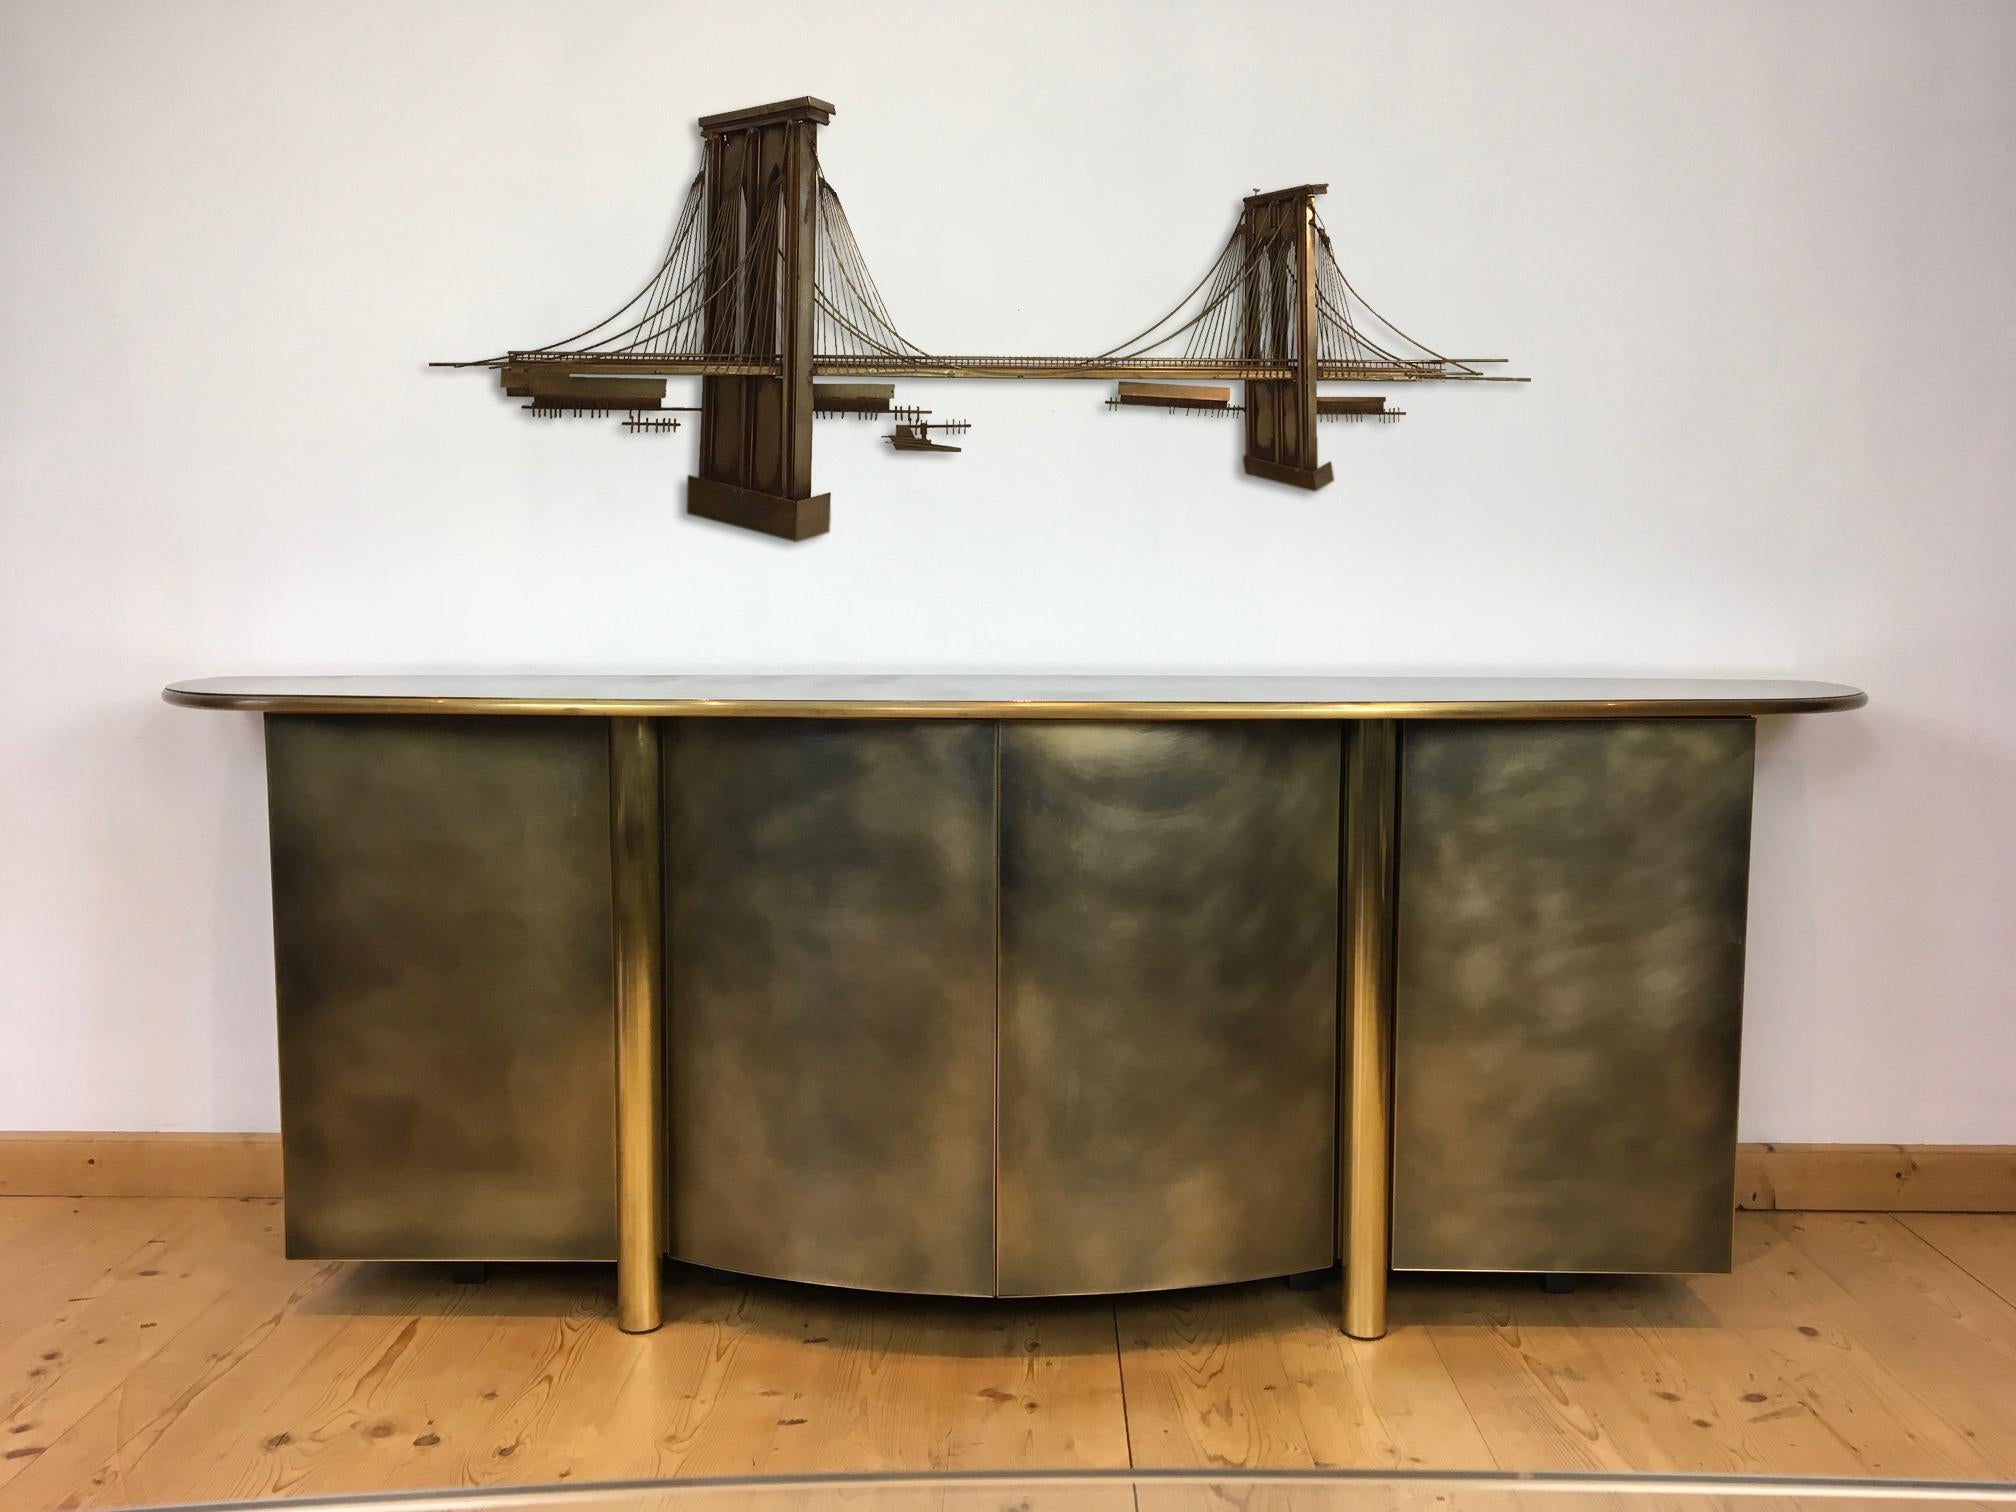 Copper with brass sideboard by Belgo Chrome - Belgochrom Belgium.
This high quality glamorous bicolor sideboard, credenza or buffet cabinet by Belgo chrom
has 4 doors with a push open system with inside wooden shelves. The top of the cabinet is